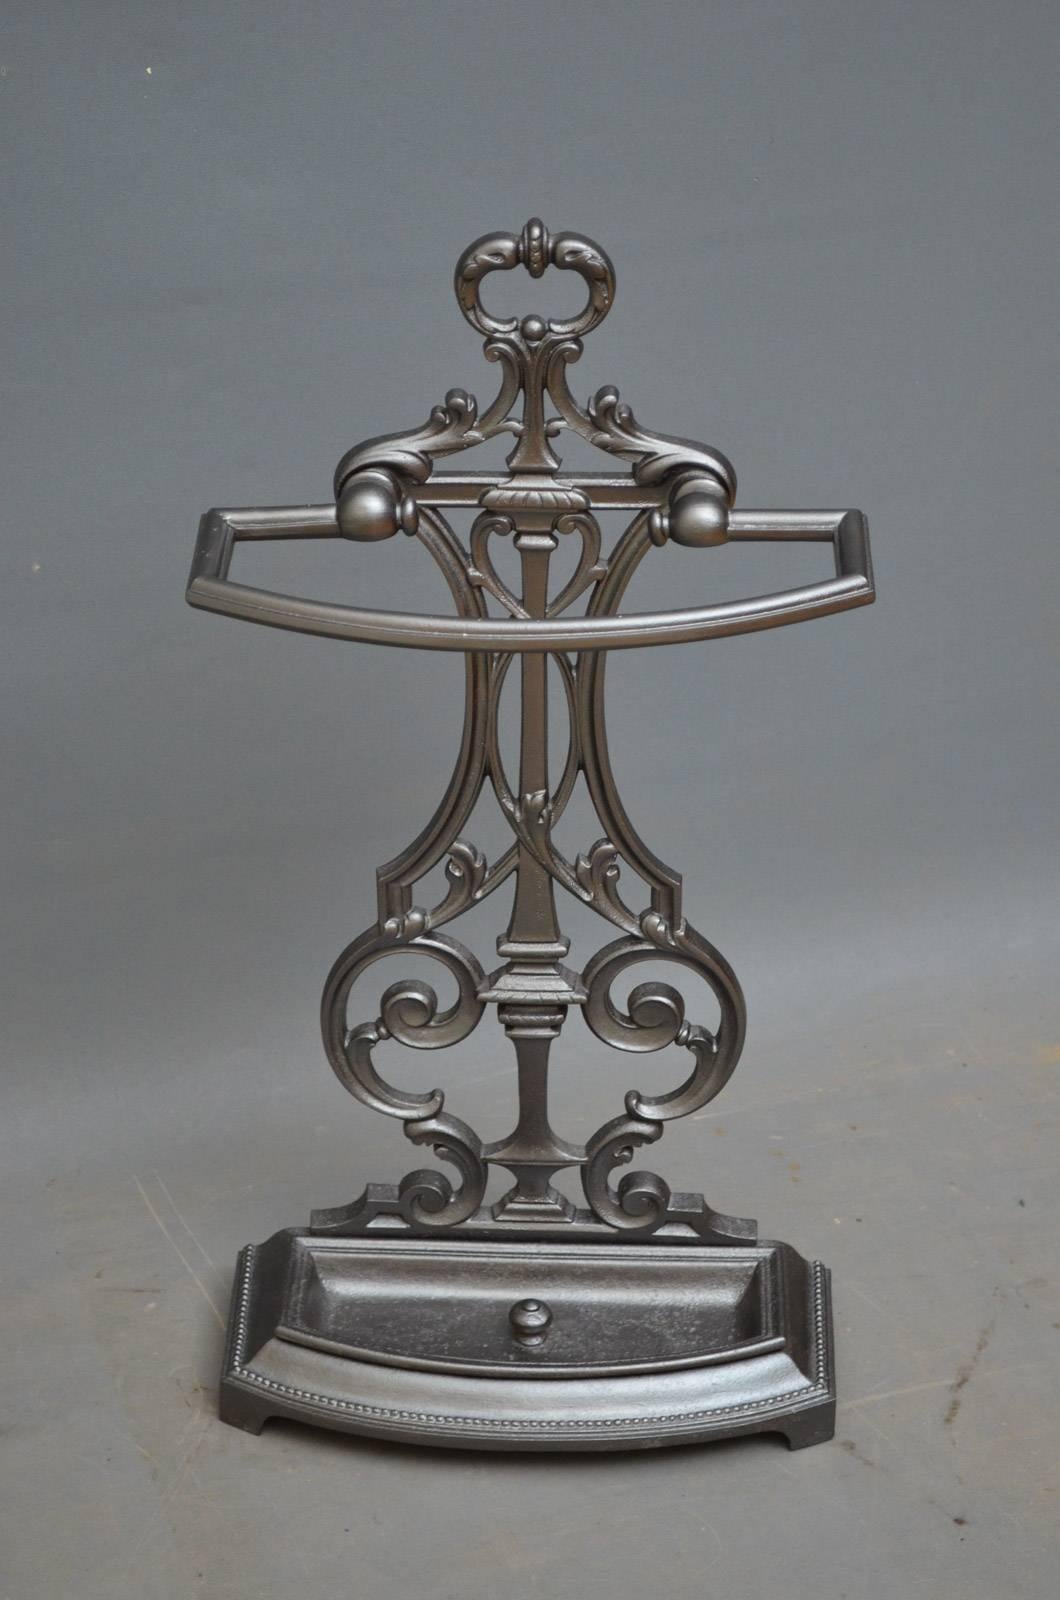 K0282 Art Nouveau cast iron hall stand/stick stand with floral design and original drip tray, circa 1880.
H27.5